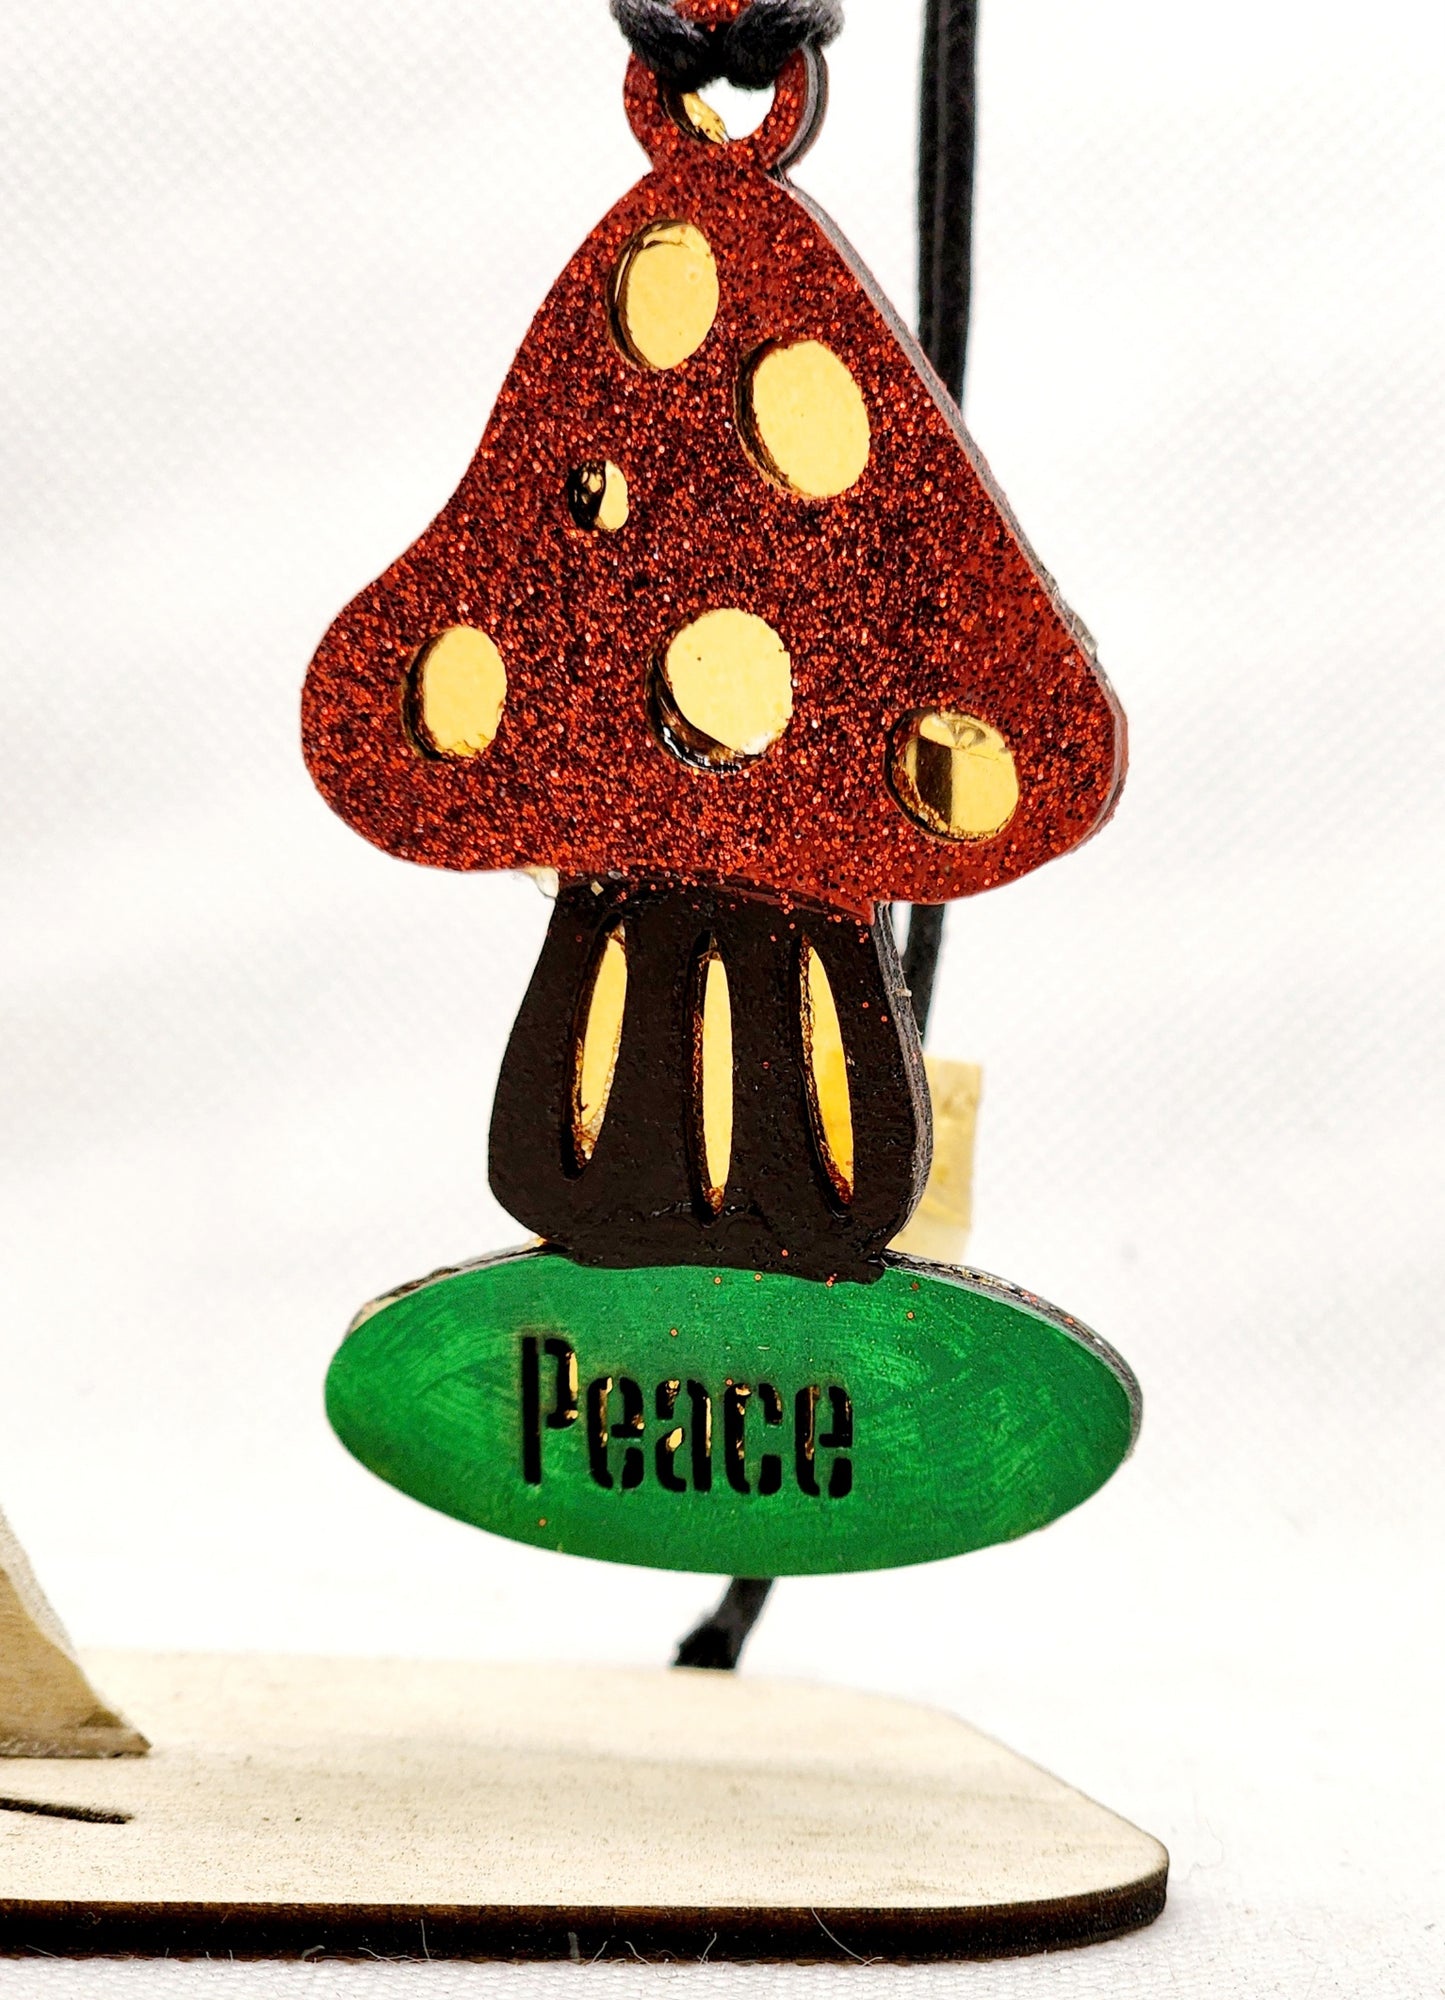 Mushroom Peace Car Charm with stained glass look